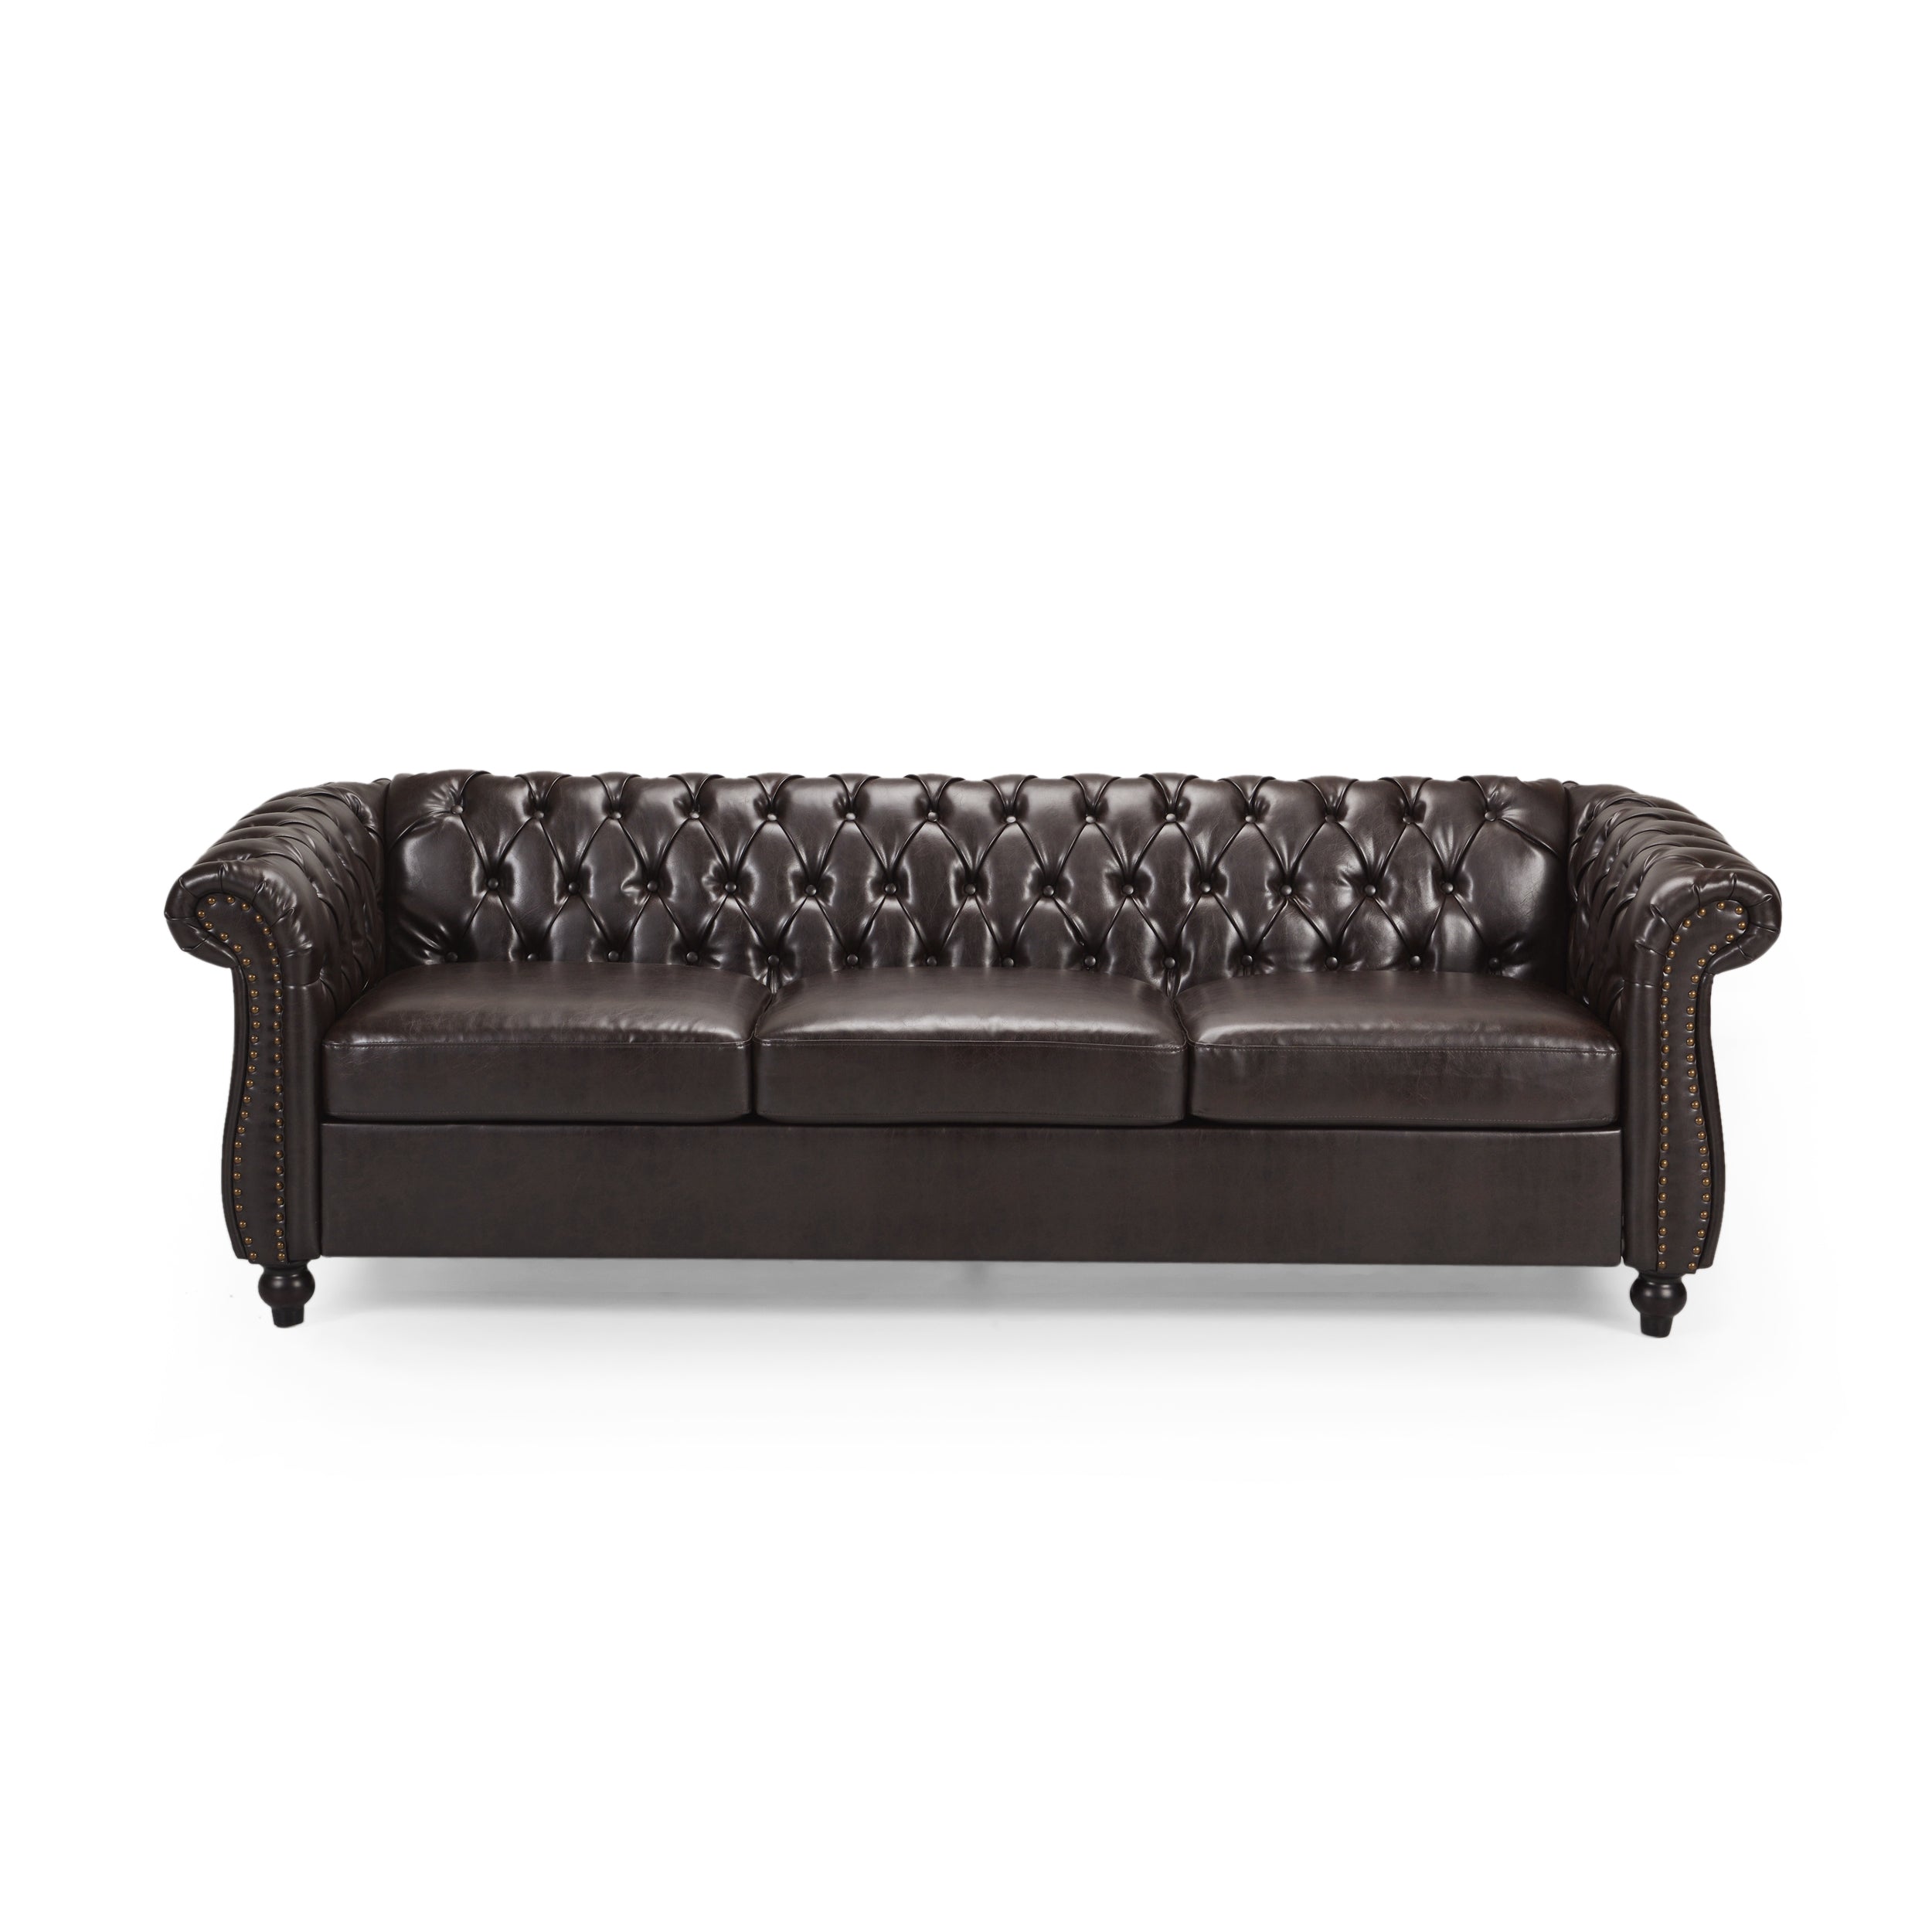 Adetokunbo Tufted Leather Chesterfield 3 Seater Sofa Brown